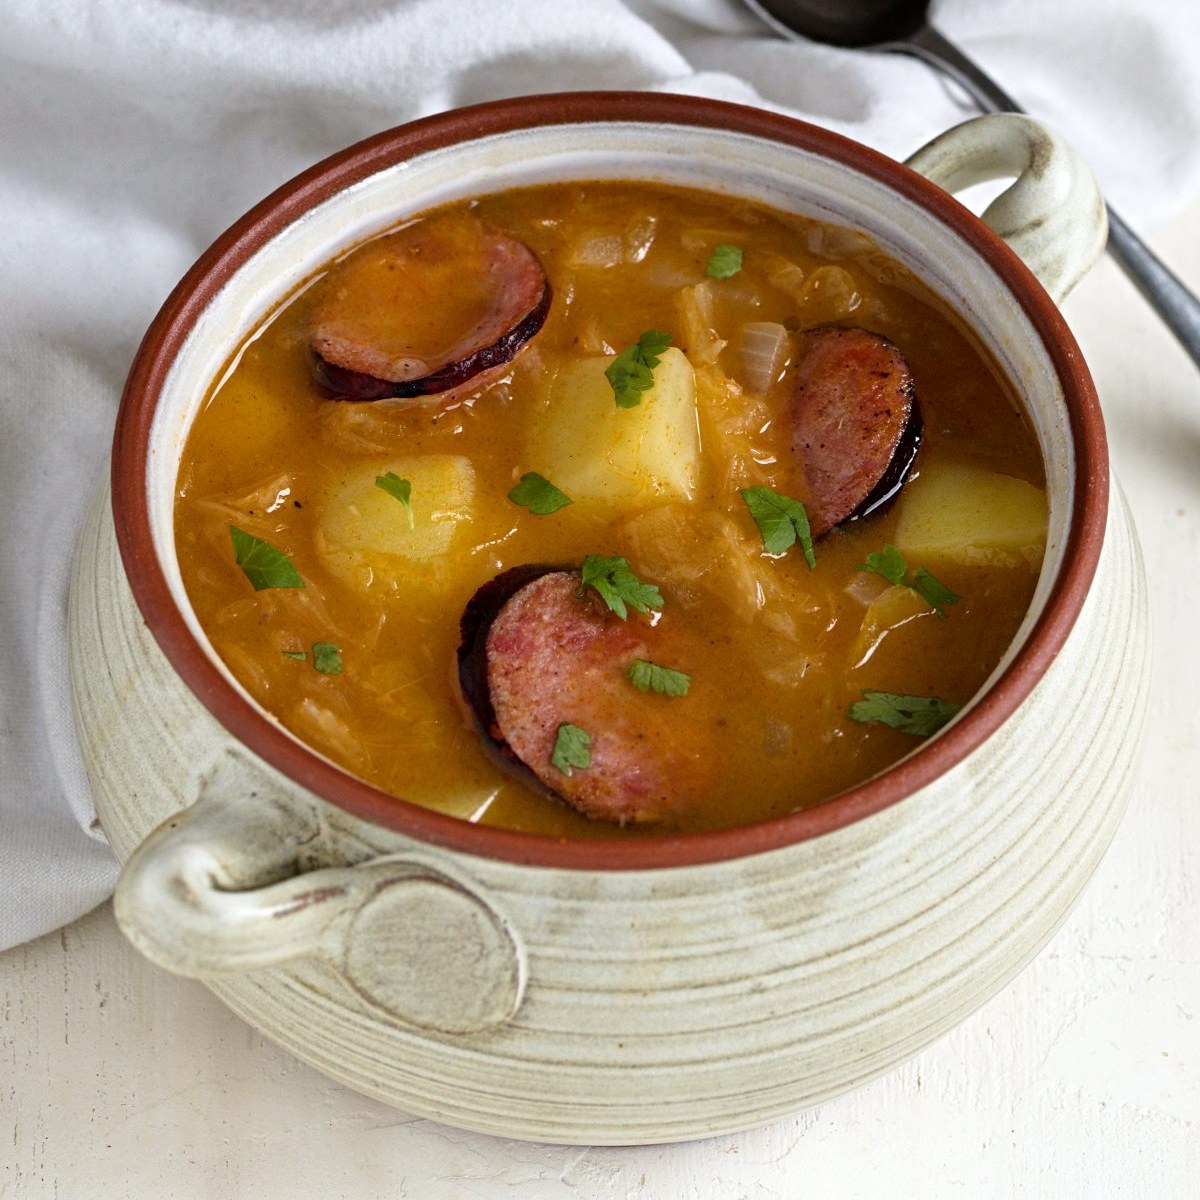 Czech sauerkraut soup with fried sausage served in a bowl.